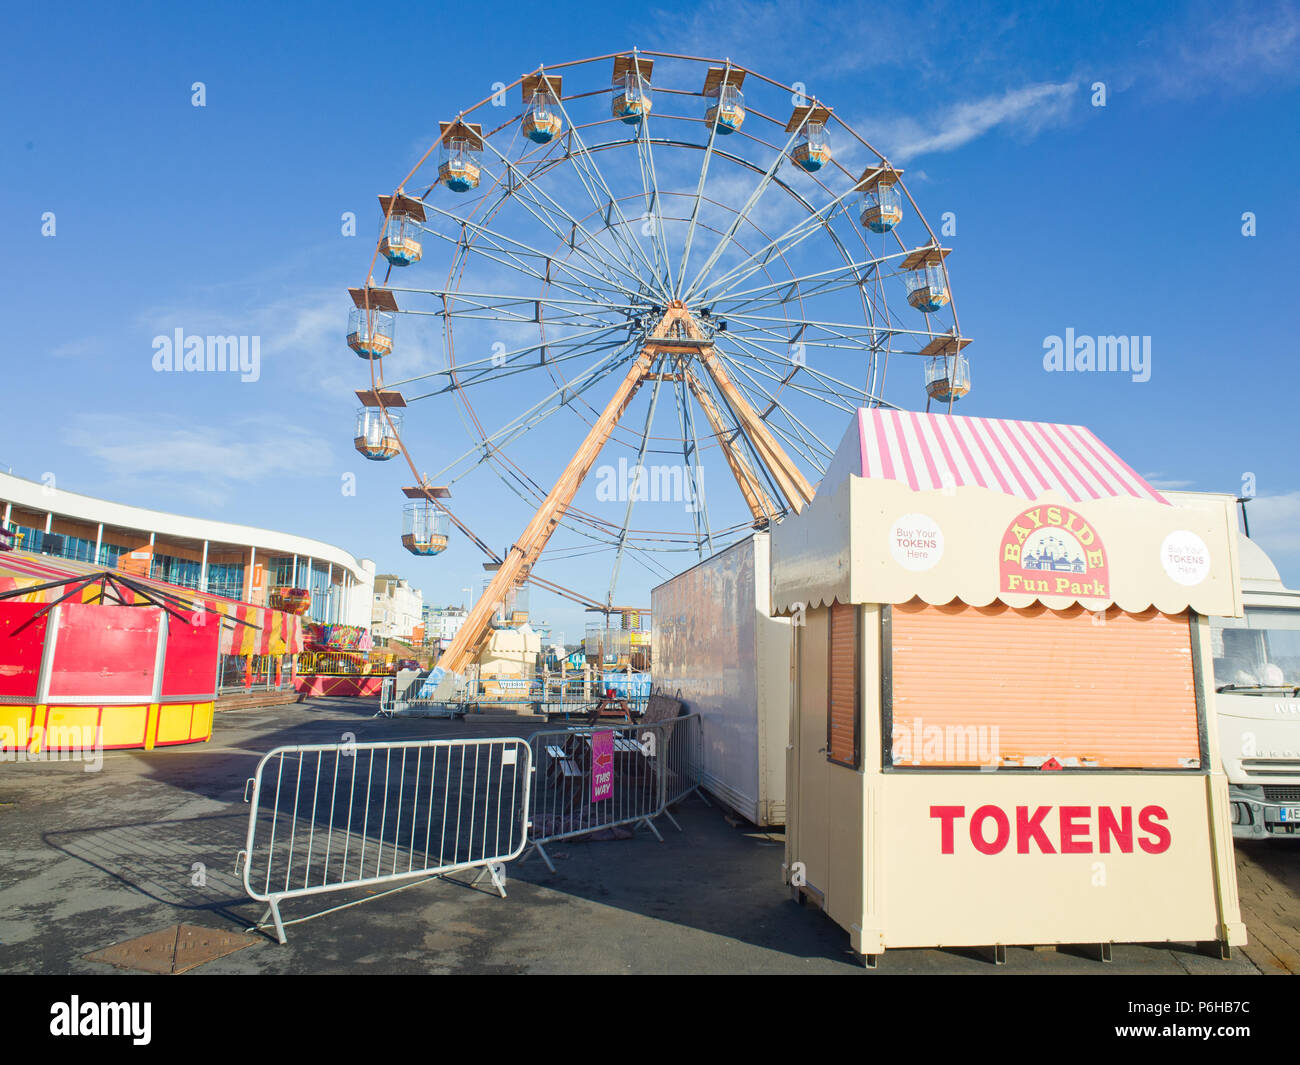 Out of Season Funfair Seaside Attraction Winter Yorkshire Coast UK Stock Photo